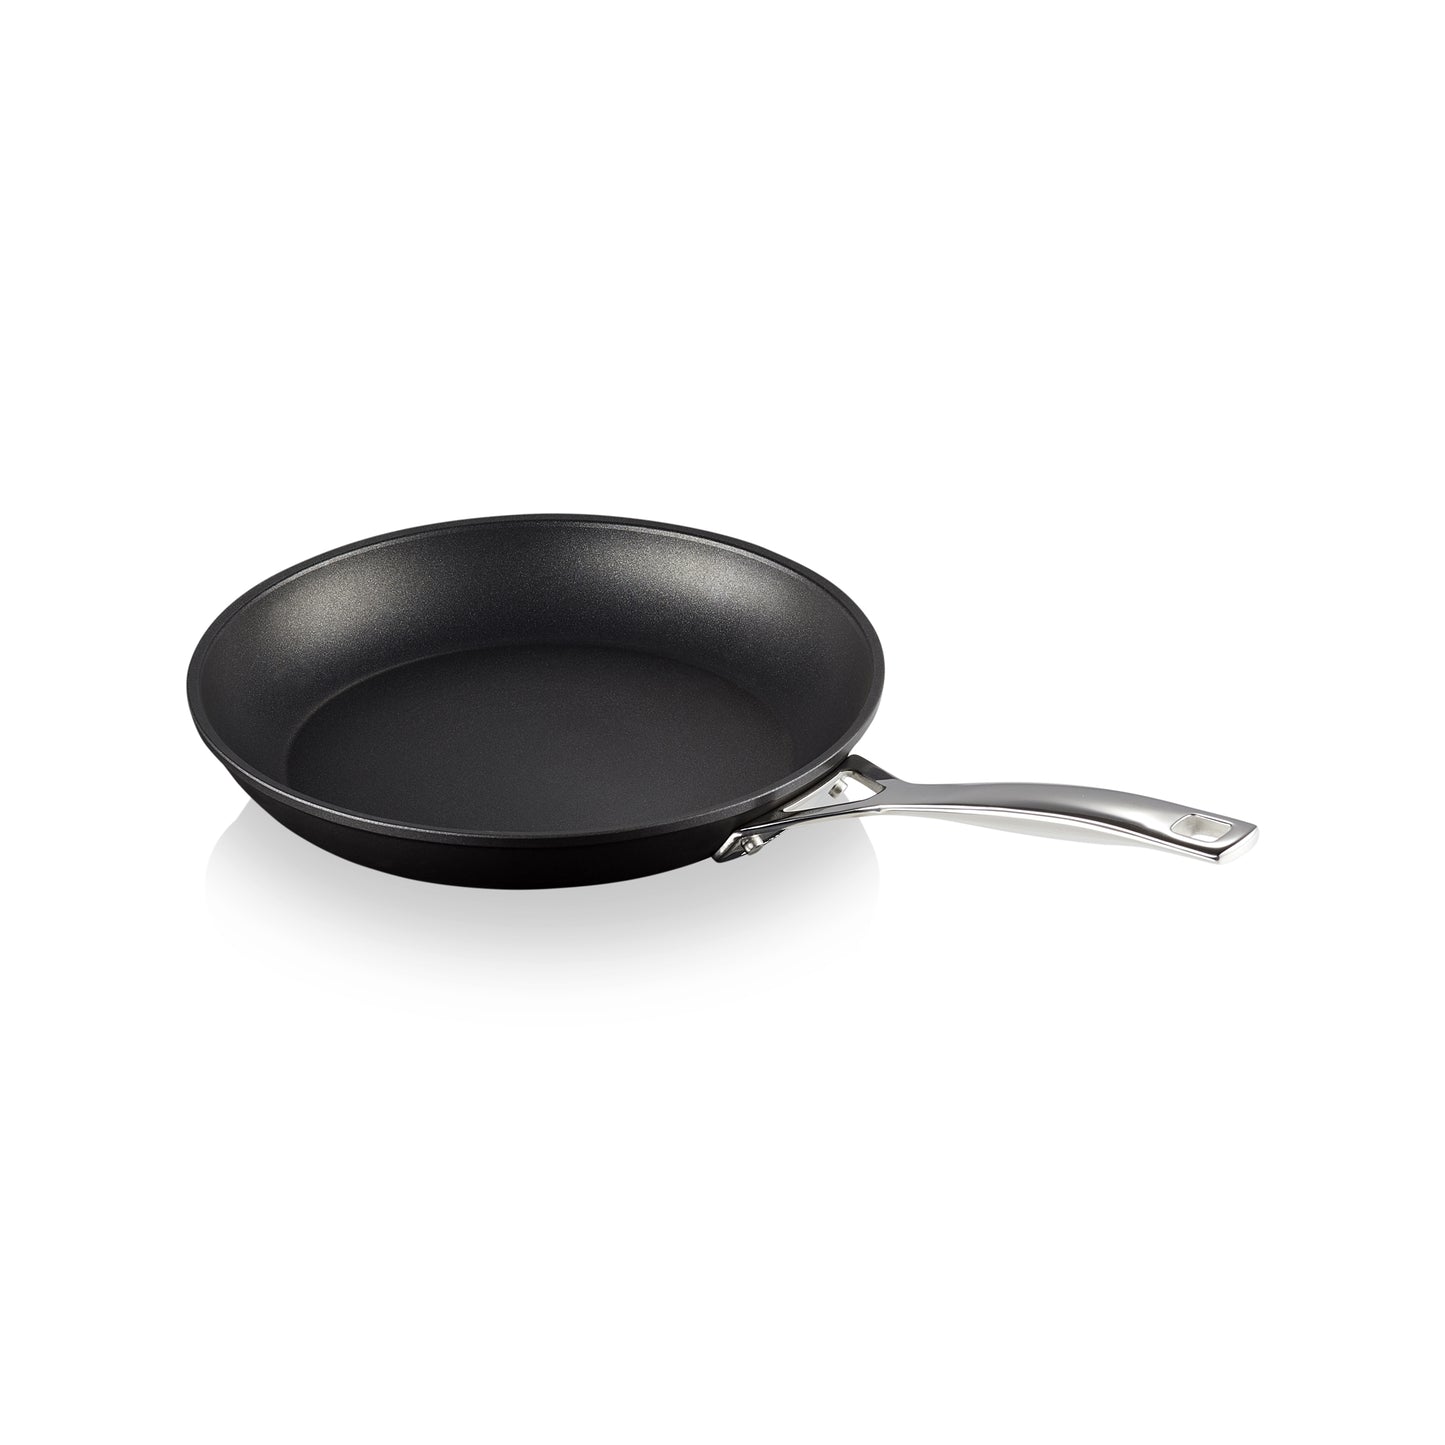 A black frying pan with a stainless steel handle